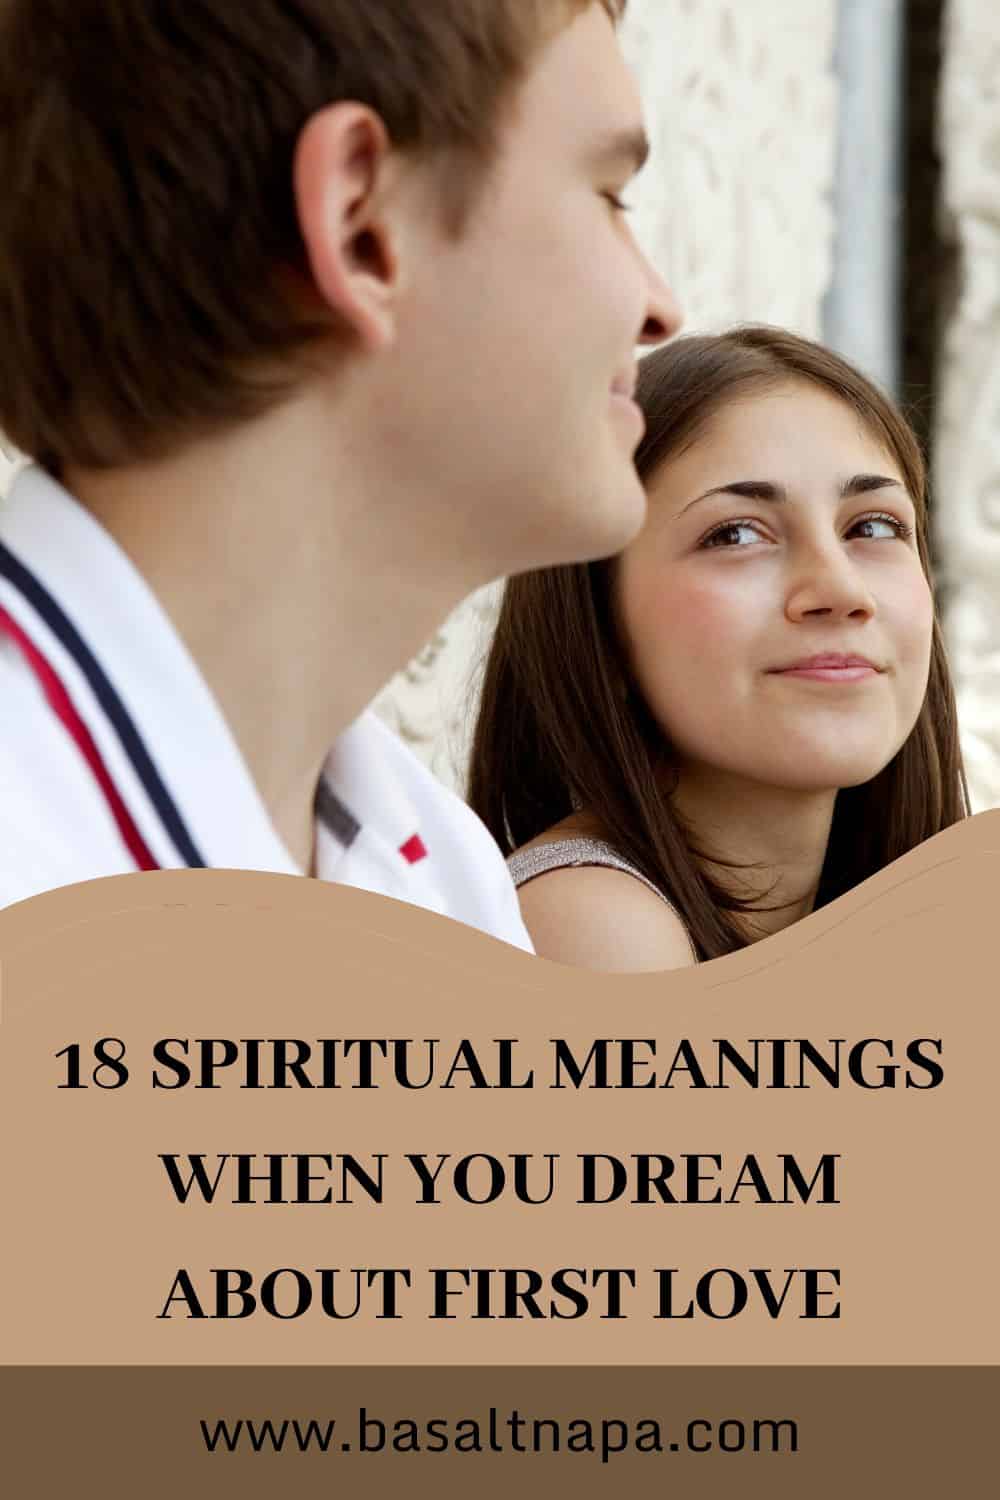 18 Spiritual Meanings When You Dream About First Love